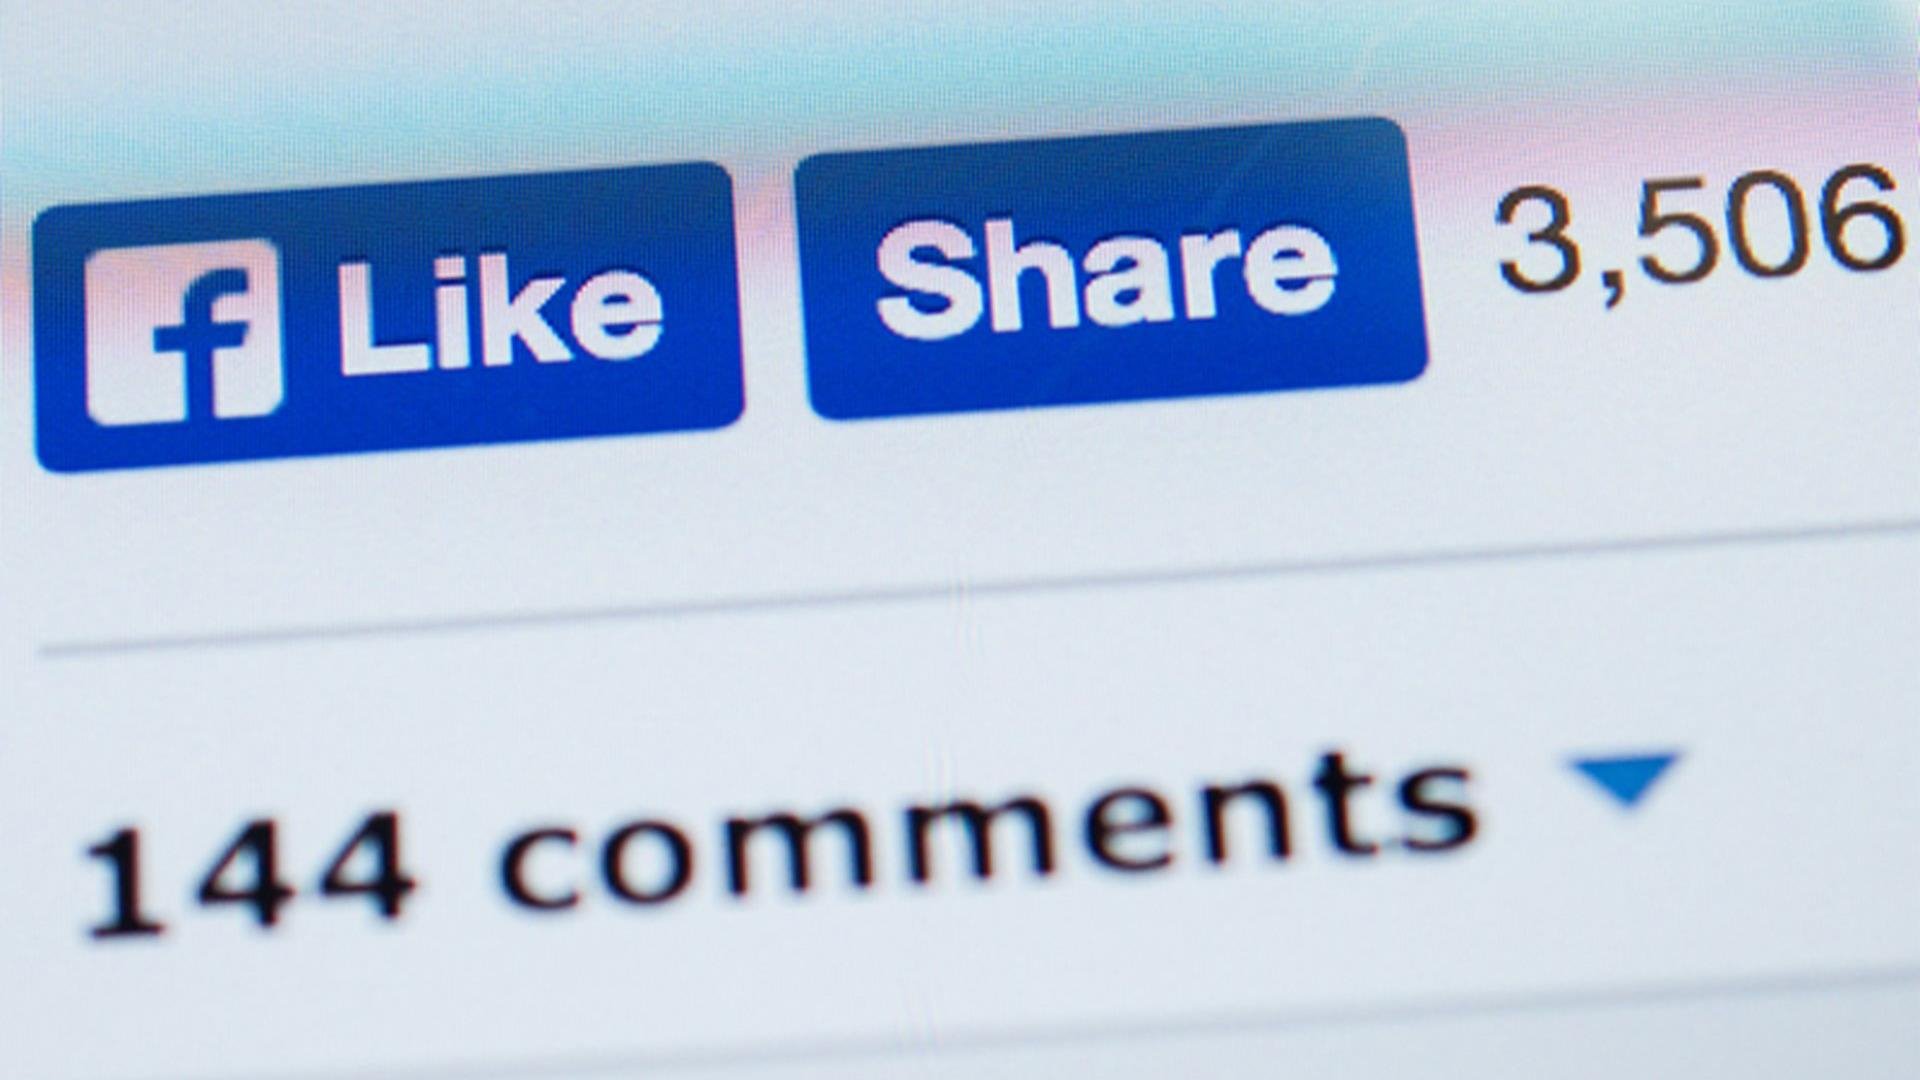 Ask the expert: Can we discipline an employee for Facebook comments?